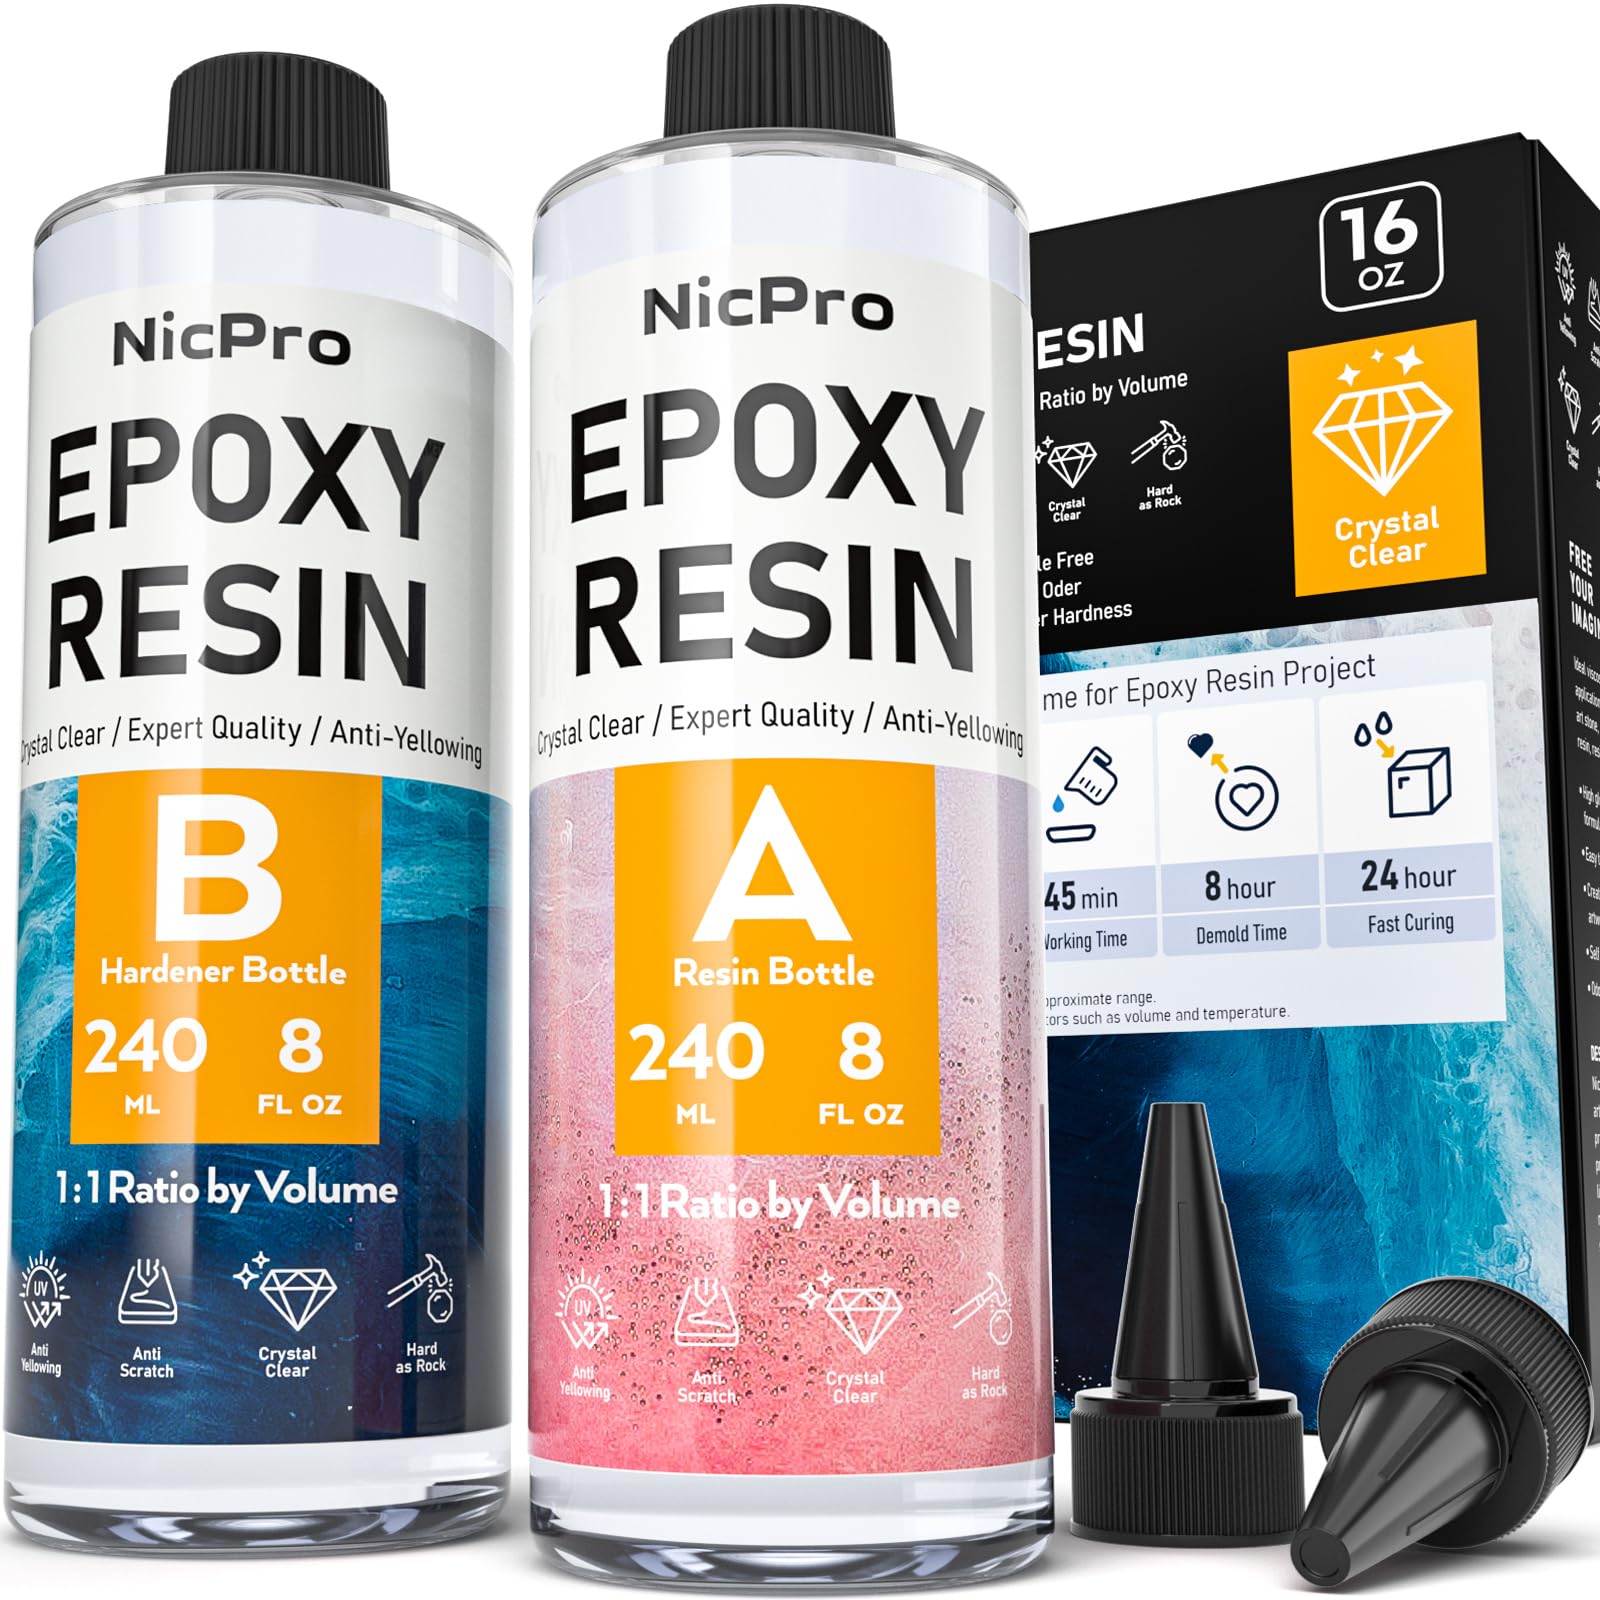 Epoxy Resin Kit for Beginners - 15.5 FL.OZ. Crystal Clear Casting and  Coating Epoxy Resin for Jewelry Making, Art, Crafts, Tumblers Resin Epoxy  Kit